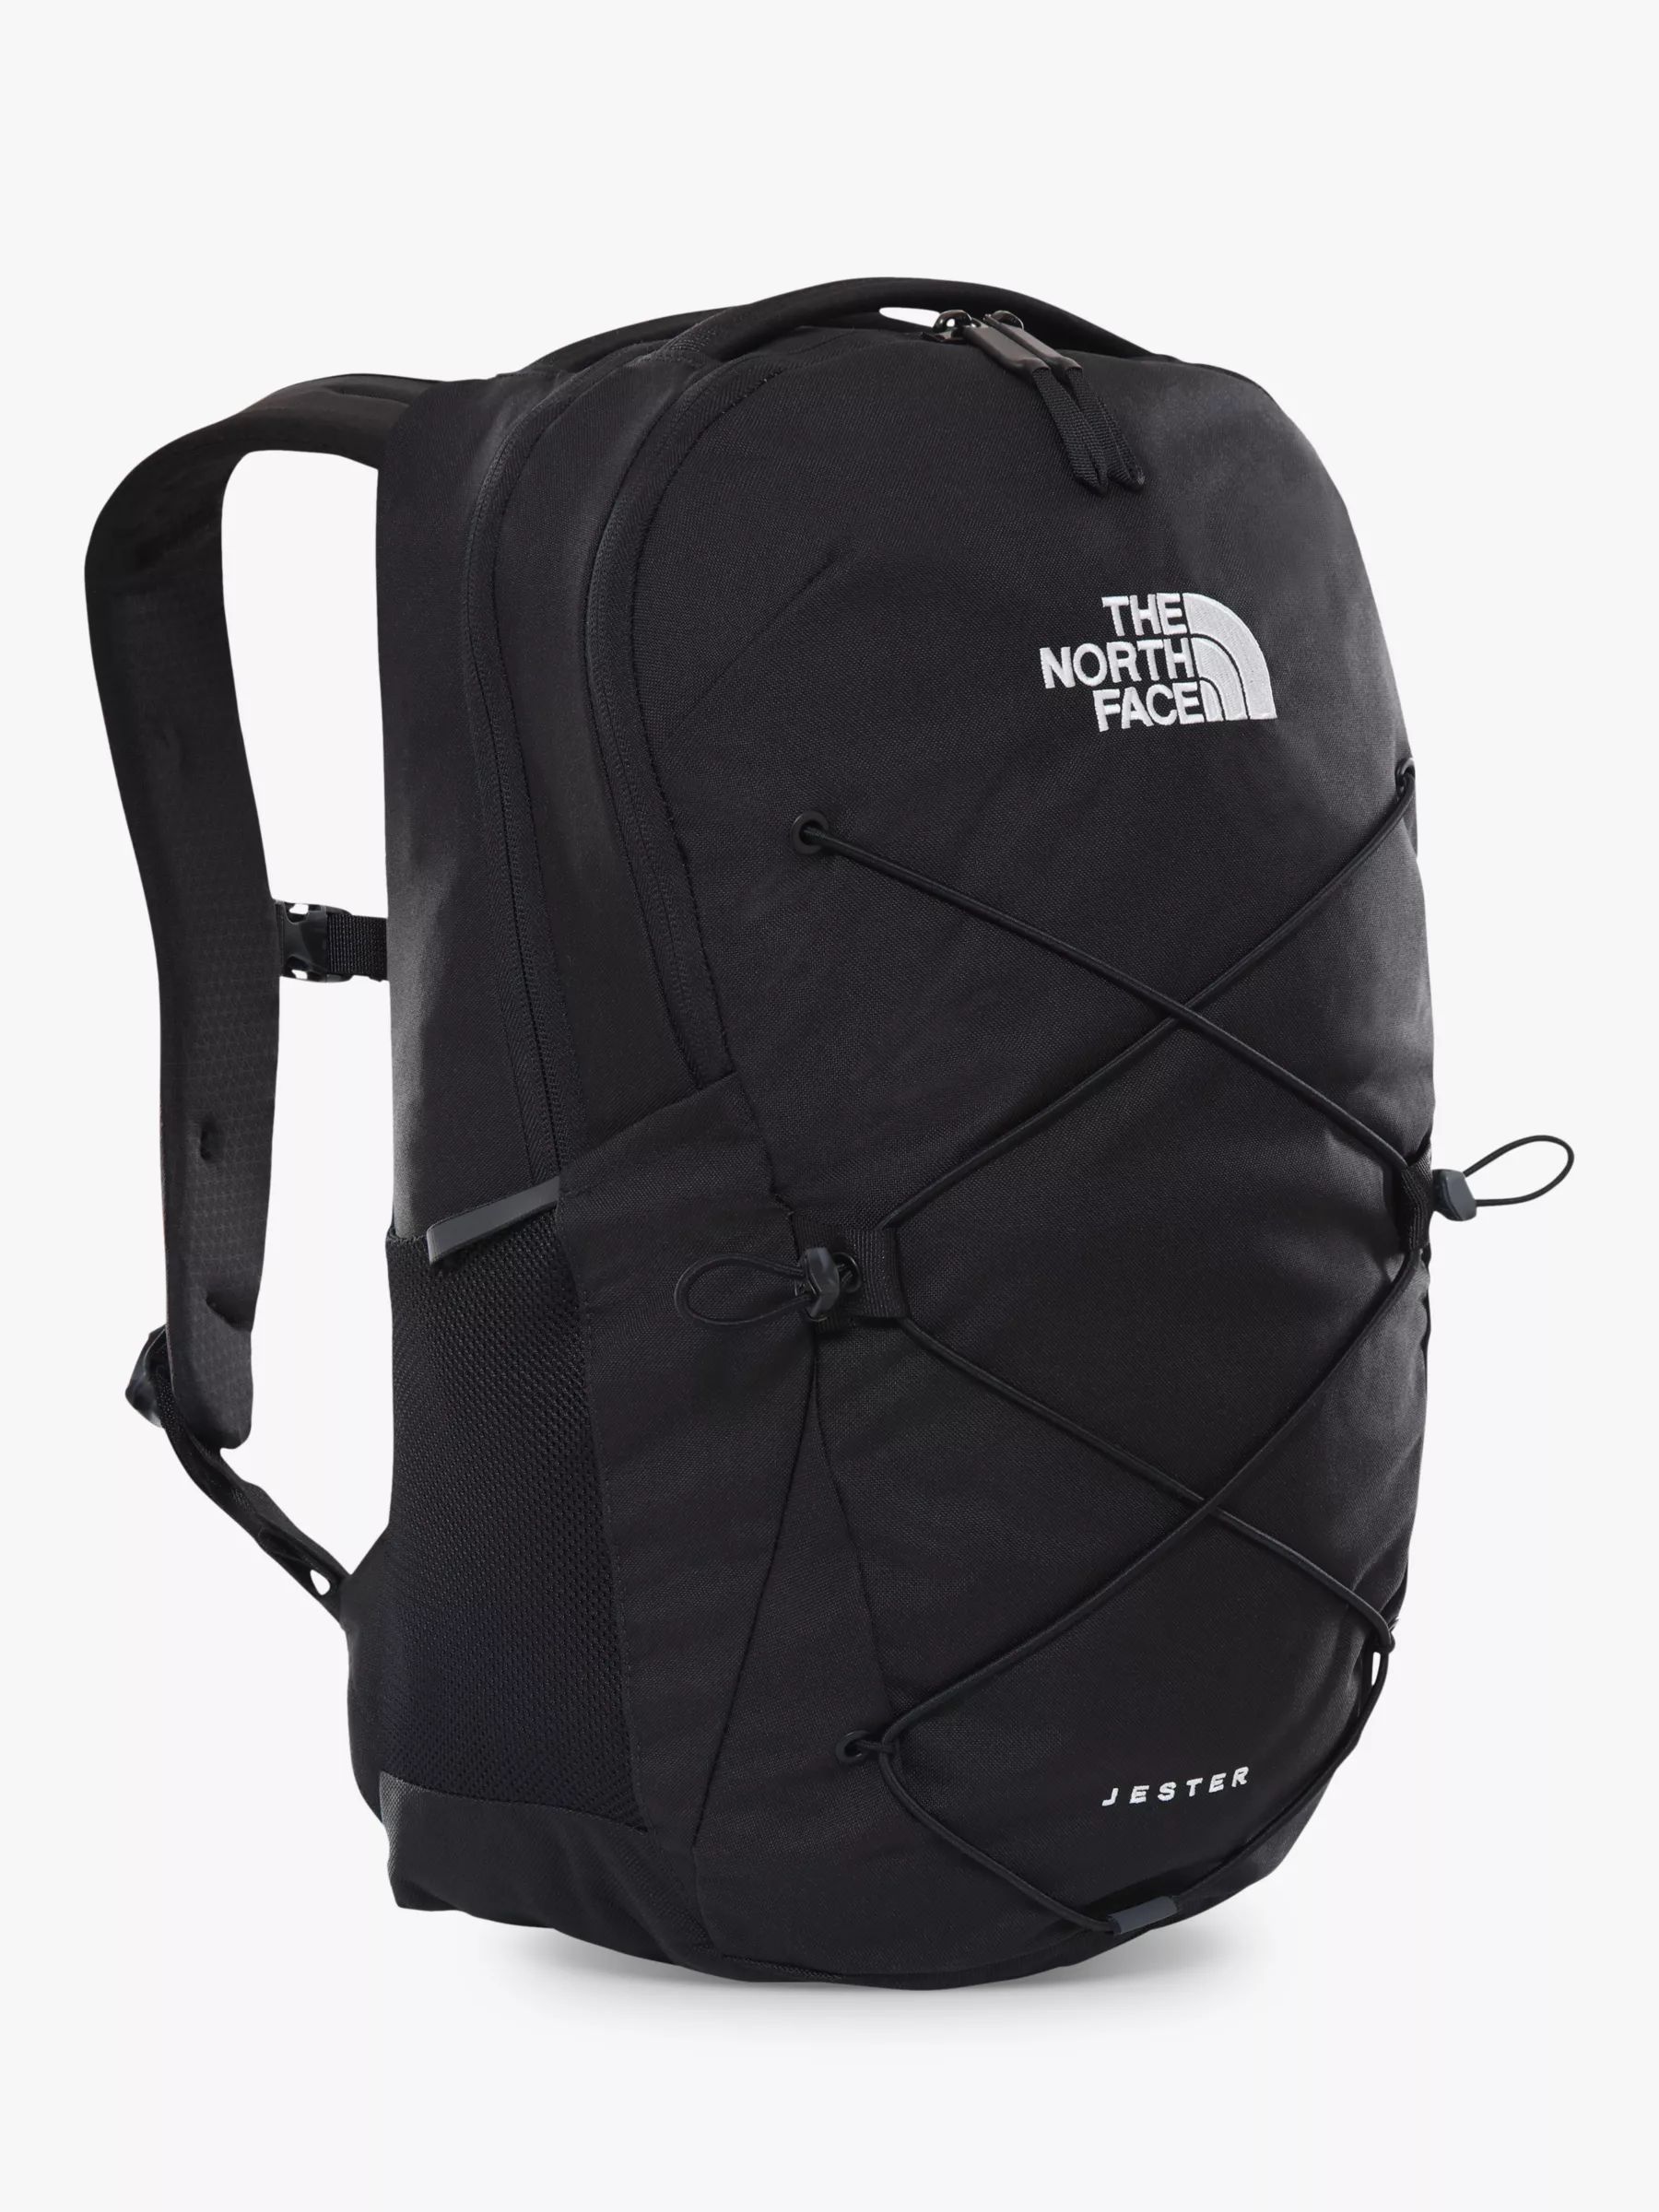 The North Face Jester Day Backpack, Black | John Lewis (UK)